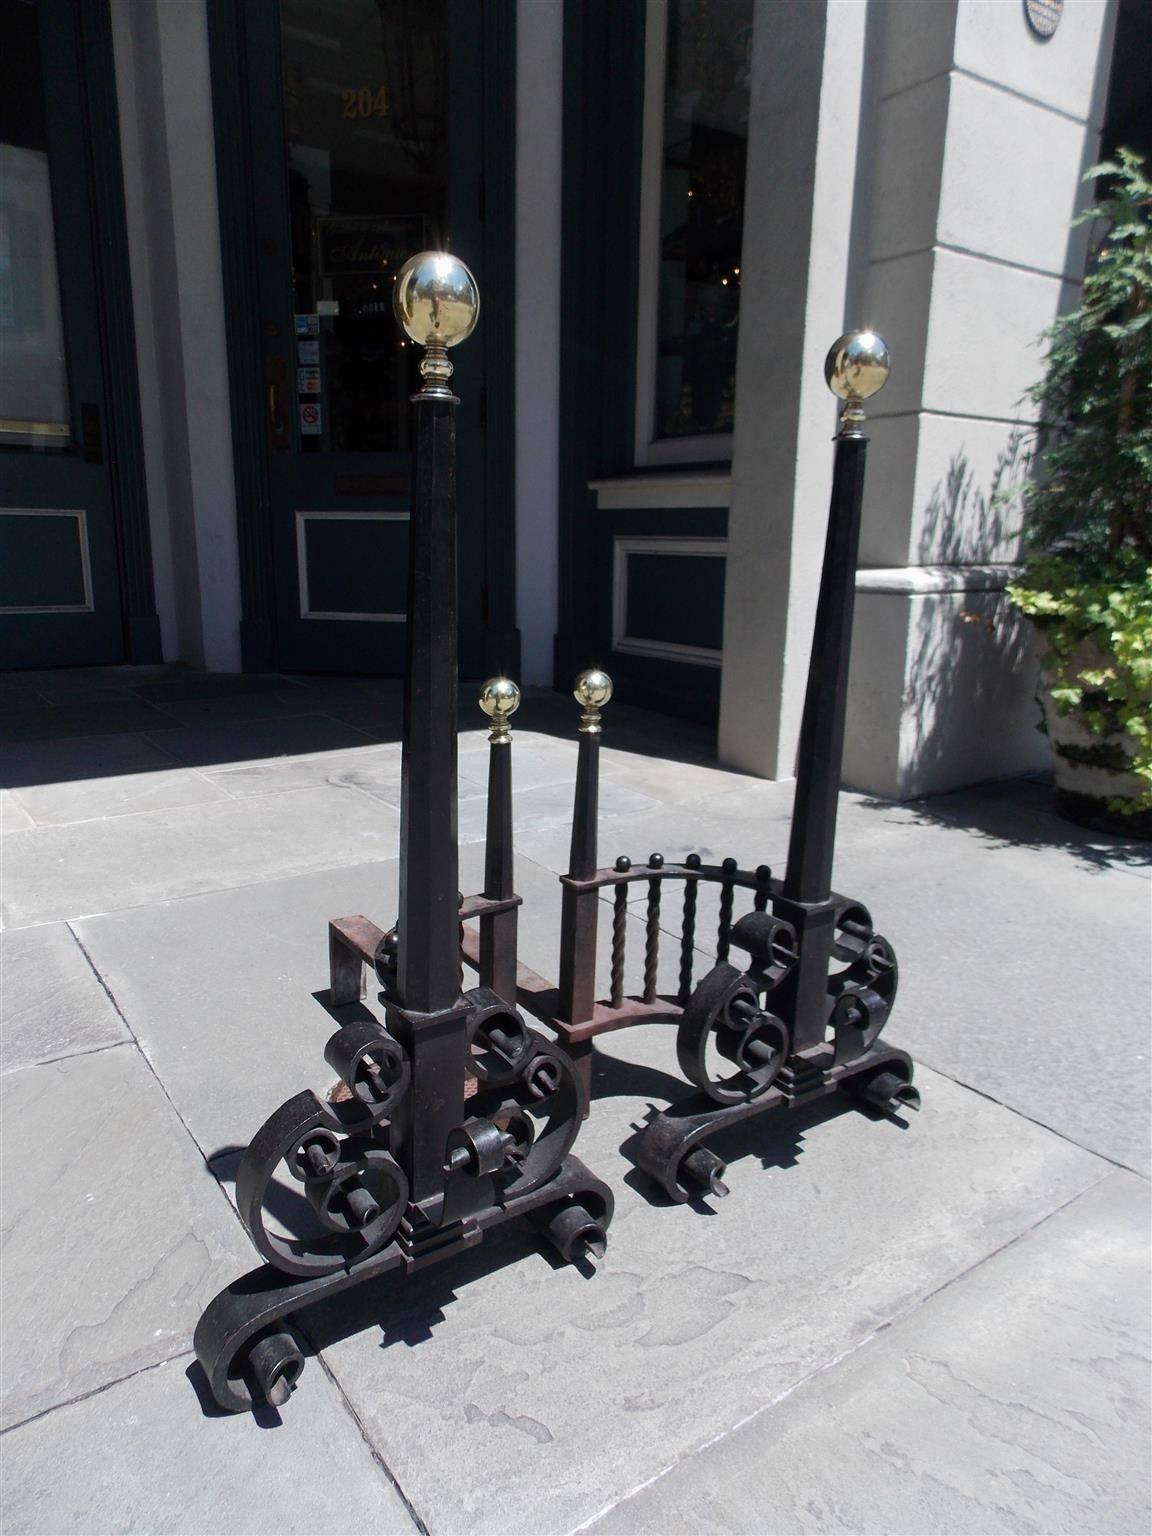 Pair of American monumental cast iron andirons with ball top finials, faceted centered columns, flanking spiral arched galleries, matching finial log stops, spit hooks, and terminating on decorative scrolled legs. Early 19th Century